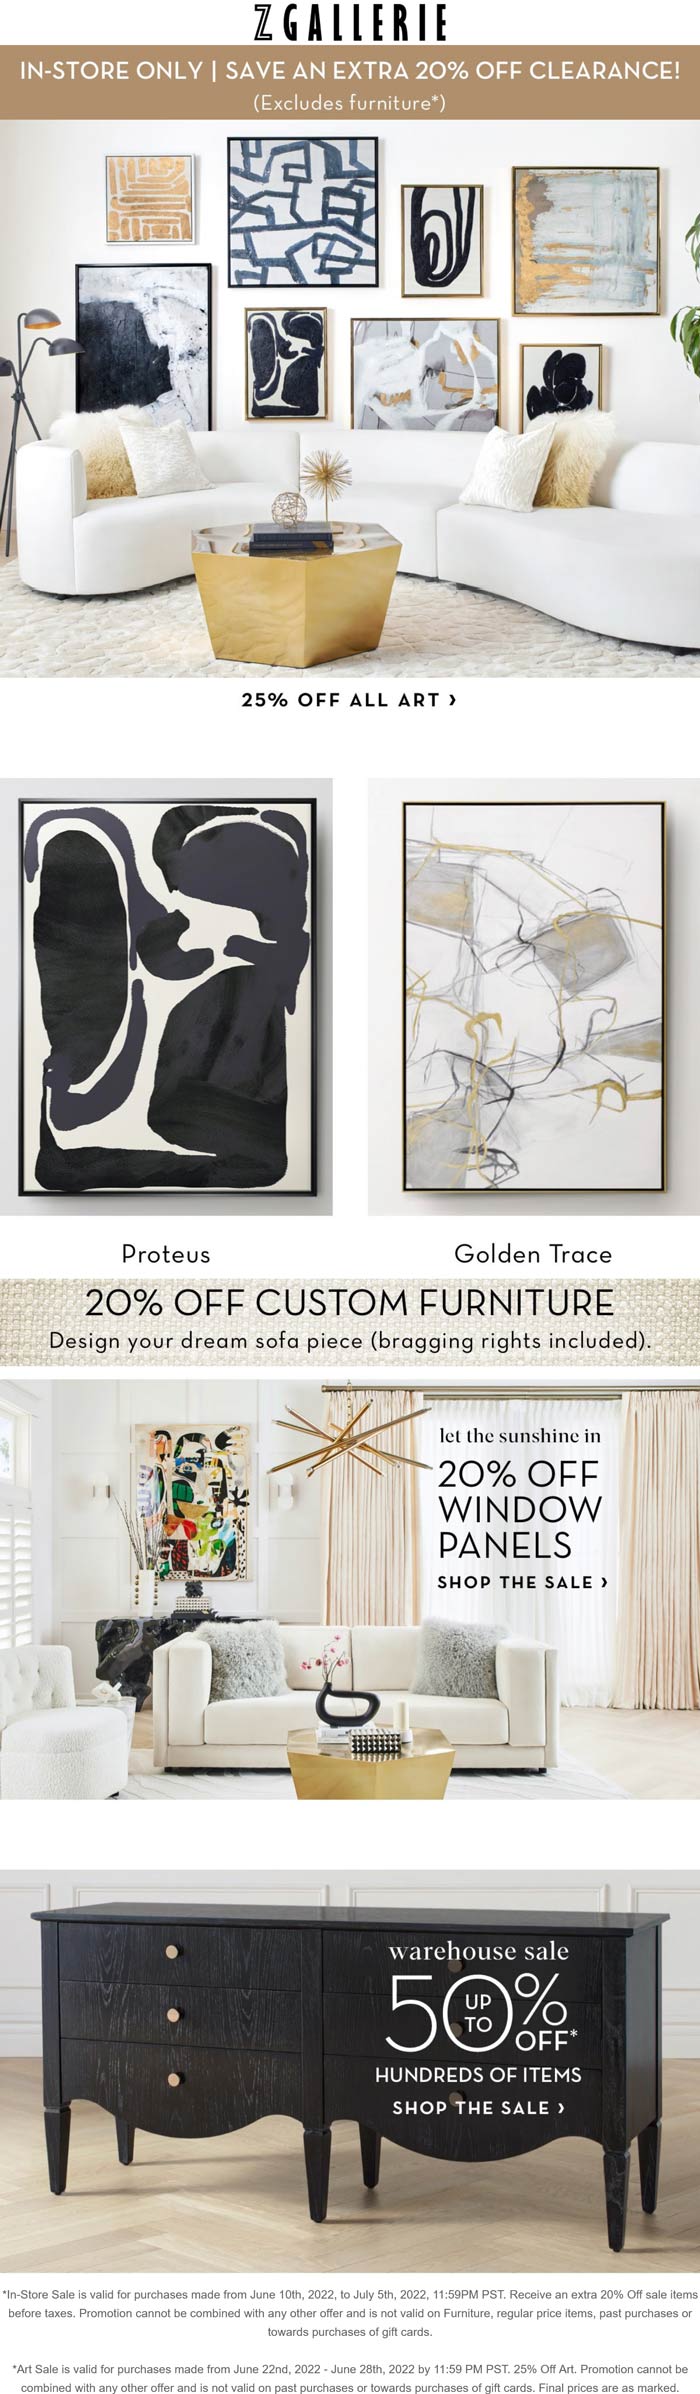 Z Gallerie coupons & promo code for [August 2022]